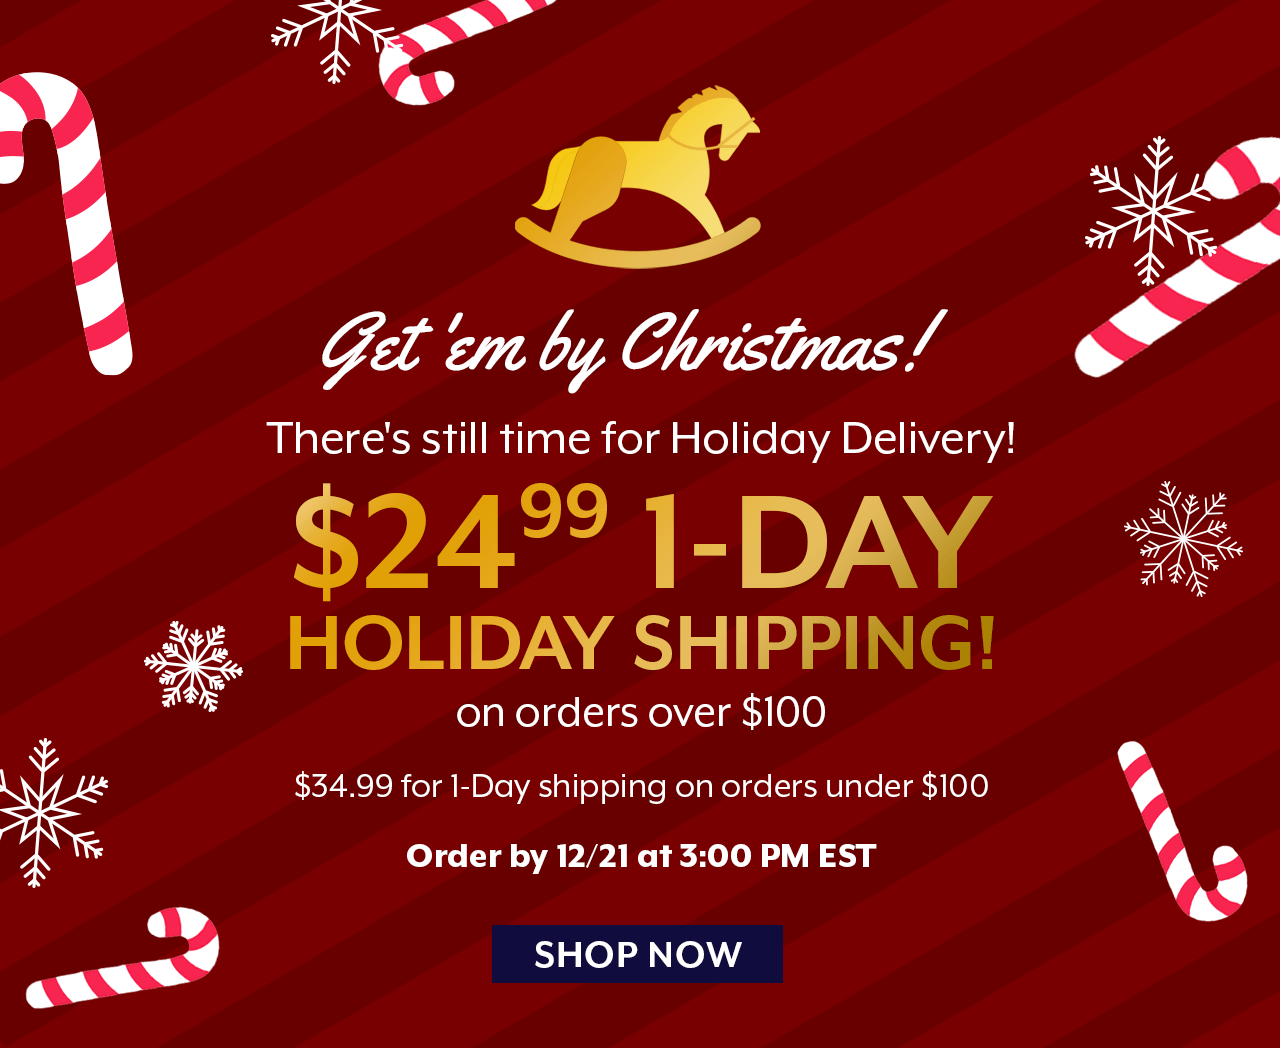 If you order by 3:00 PM EST today you can get guaranteed delivery by Christmas for only $24.99.